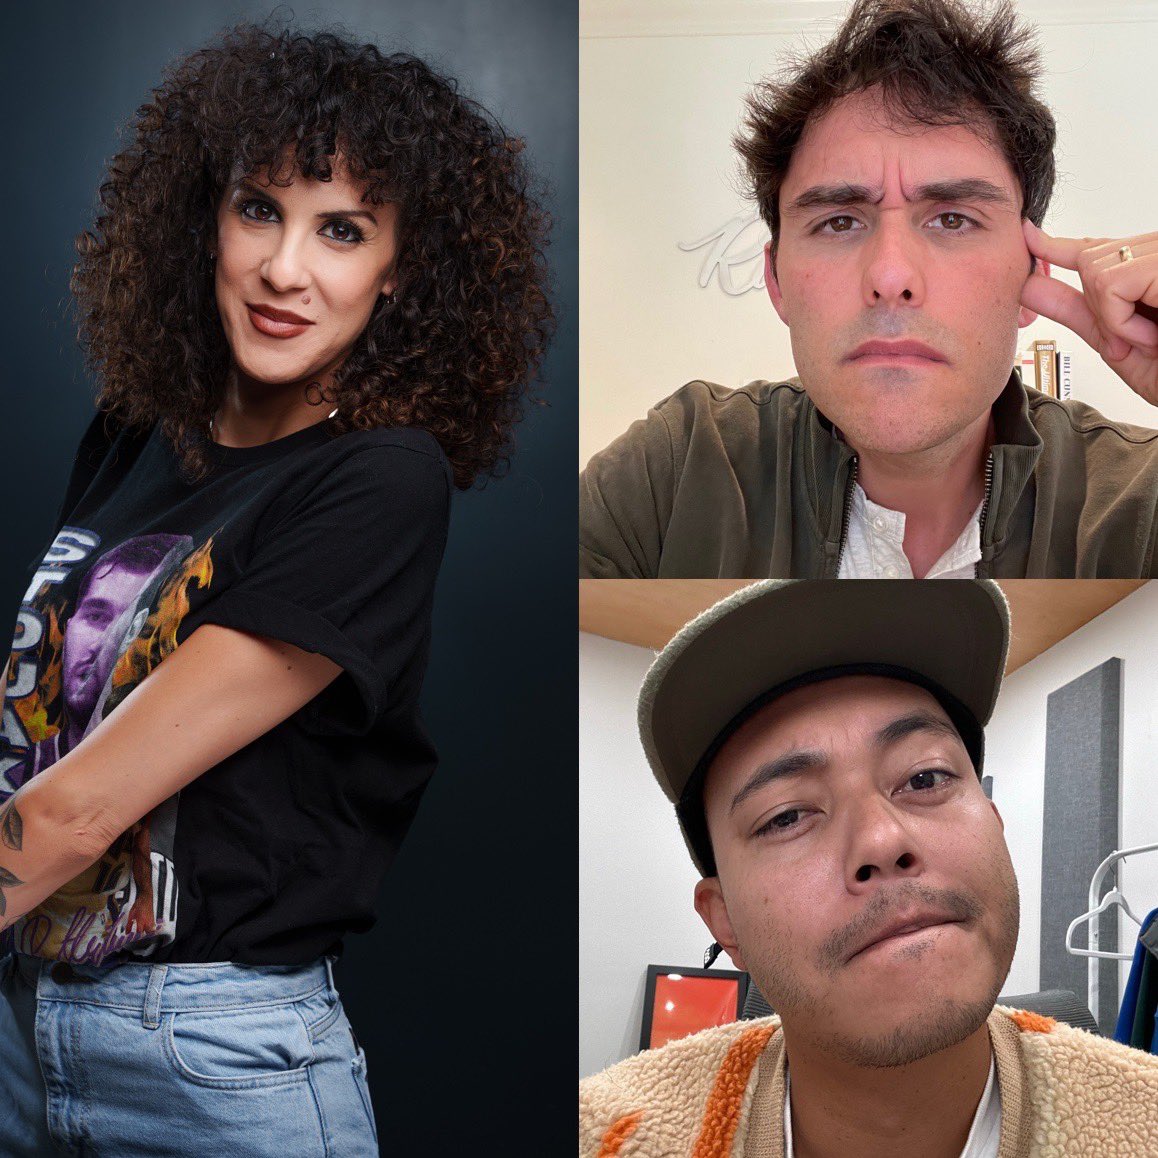 We had @marcellacomedy on episode 1673 ‘A Worm Done Et Muh Brain, More Like Pop FART Movie’ - listen now! podcasts.apple.com/us/podcast/a-w… @milesofgray @jack_obrien